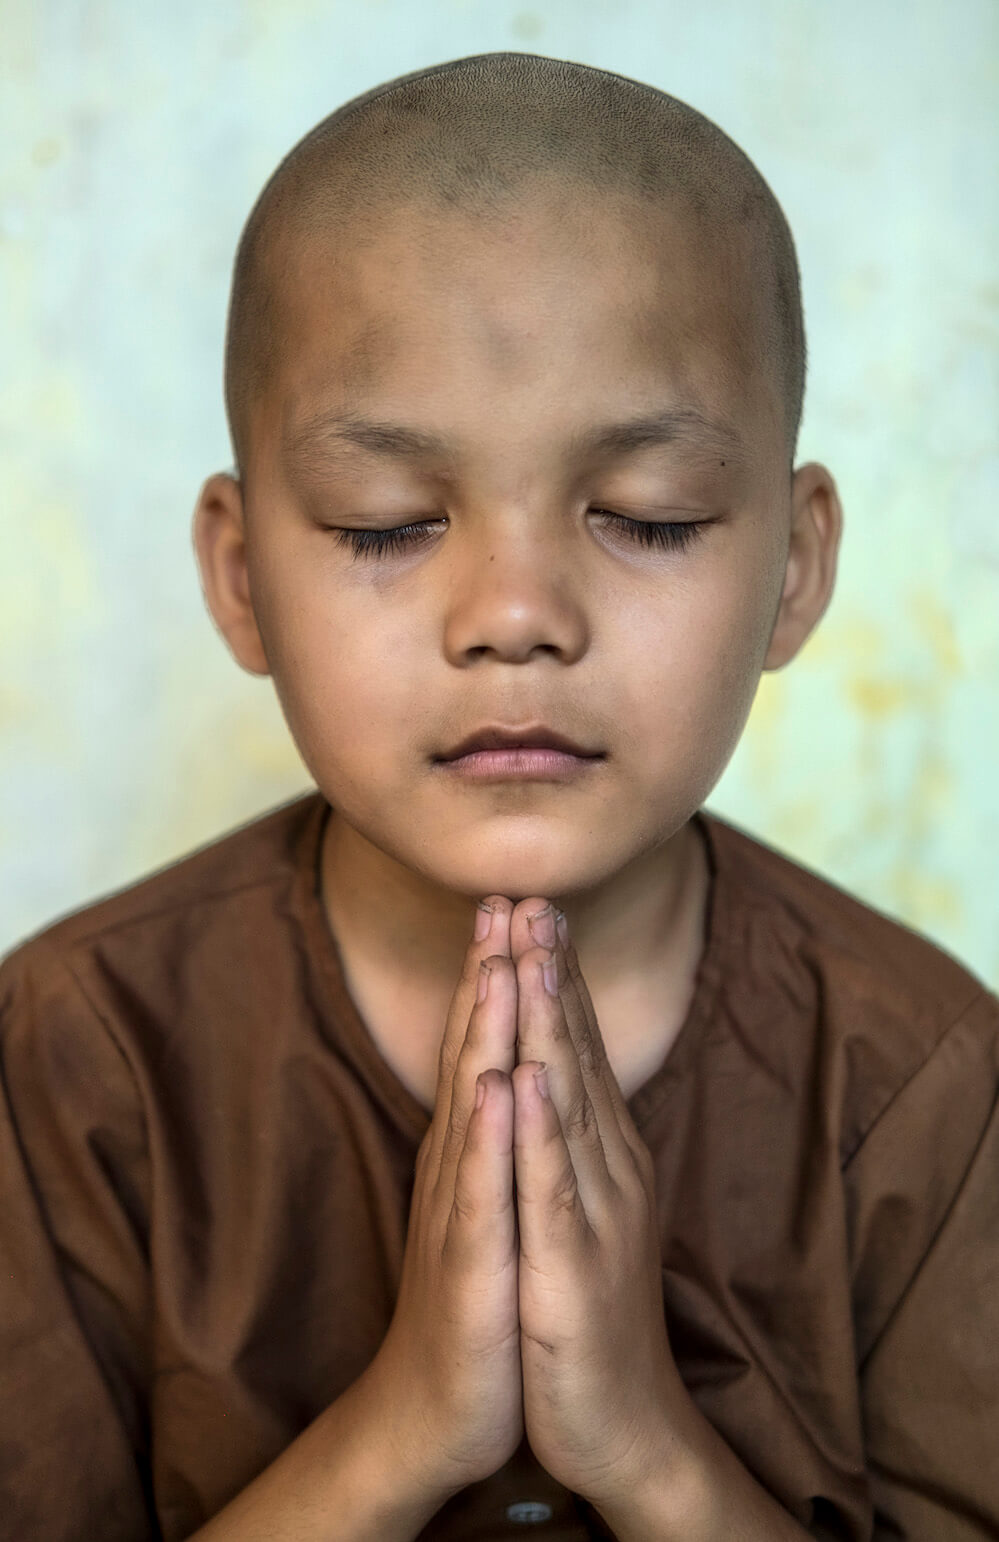 young eight-year-old novice monk Lê Văn Huy praying after doing his morning chores. The dust and grime very visible on his face and fingernails. 
(Photography In a small place of worship 20km west of Hue Vietnam)